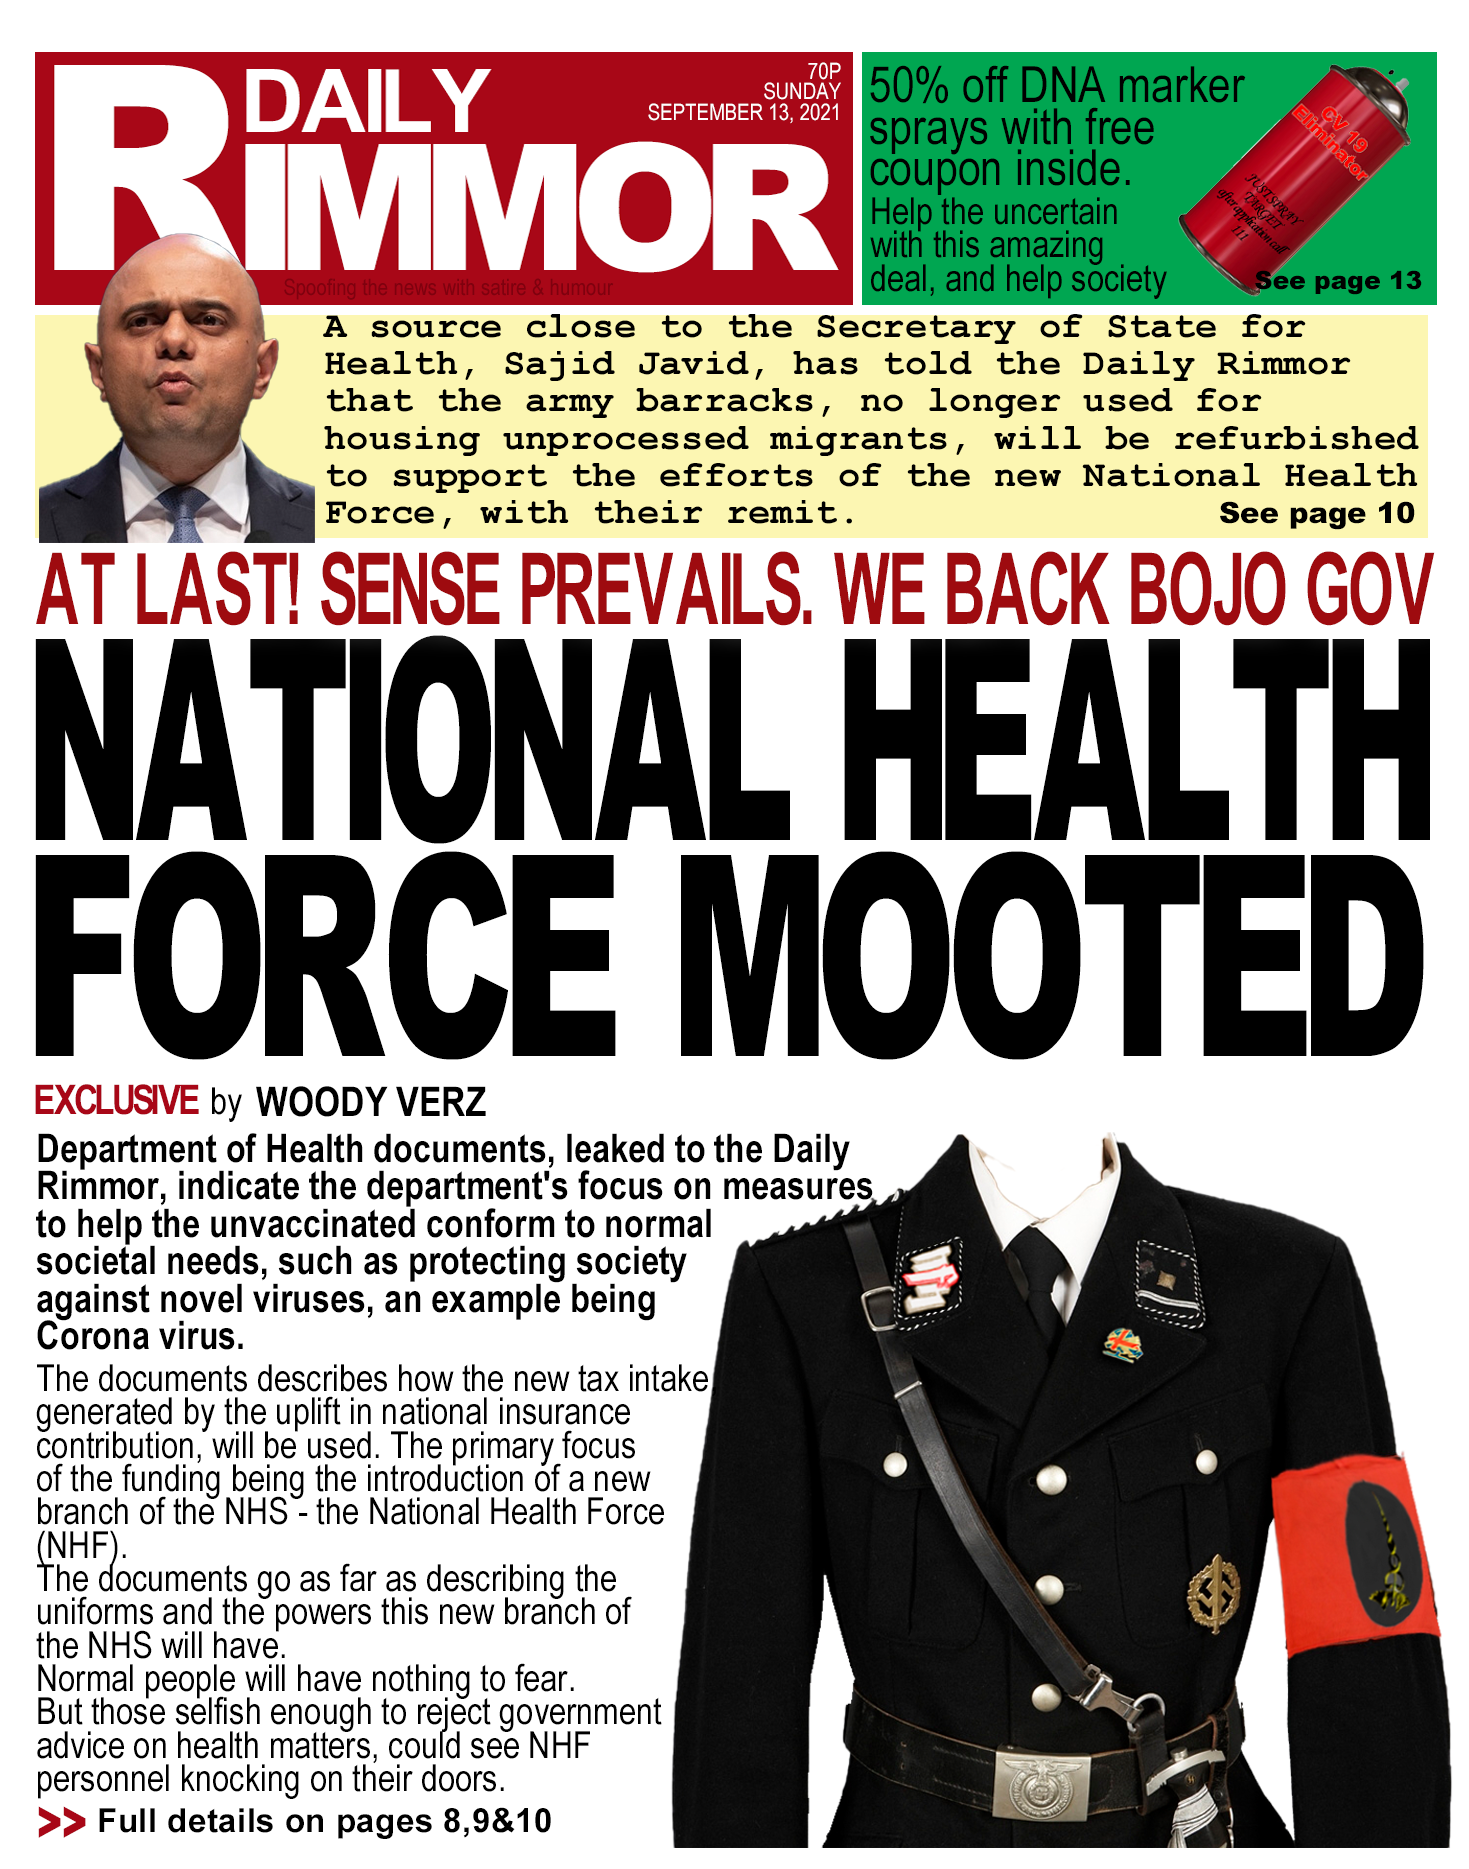 Daily Rimmor front page. COVID-19, Monday 13 September